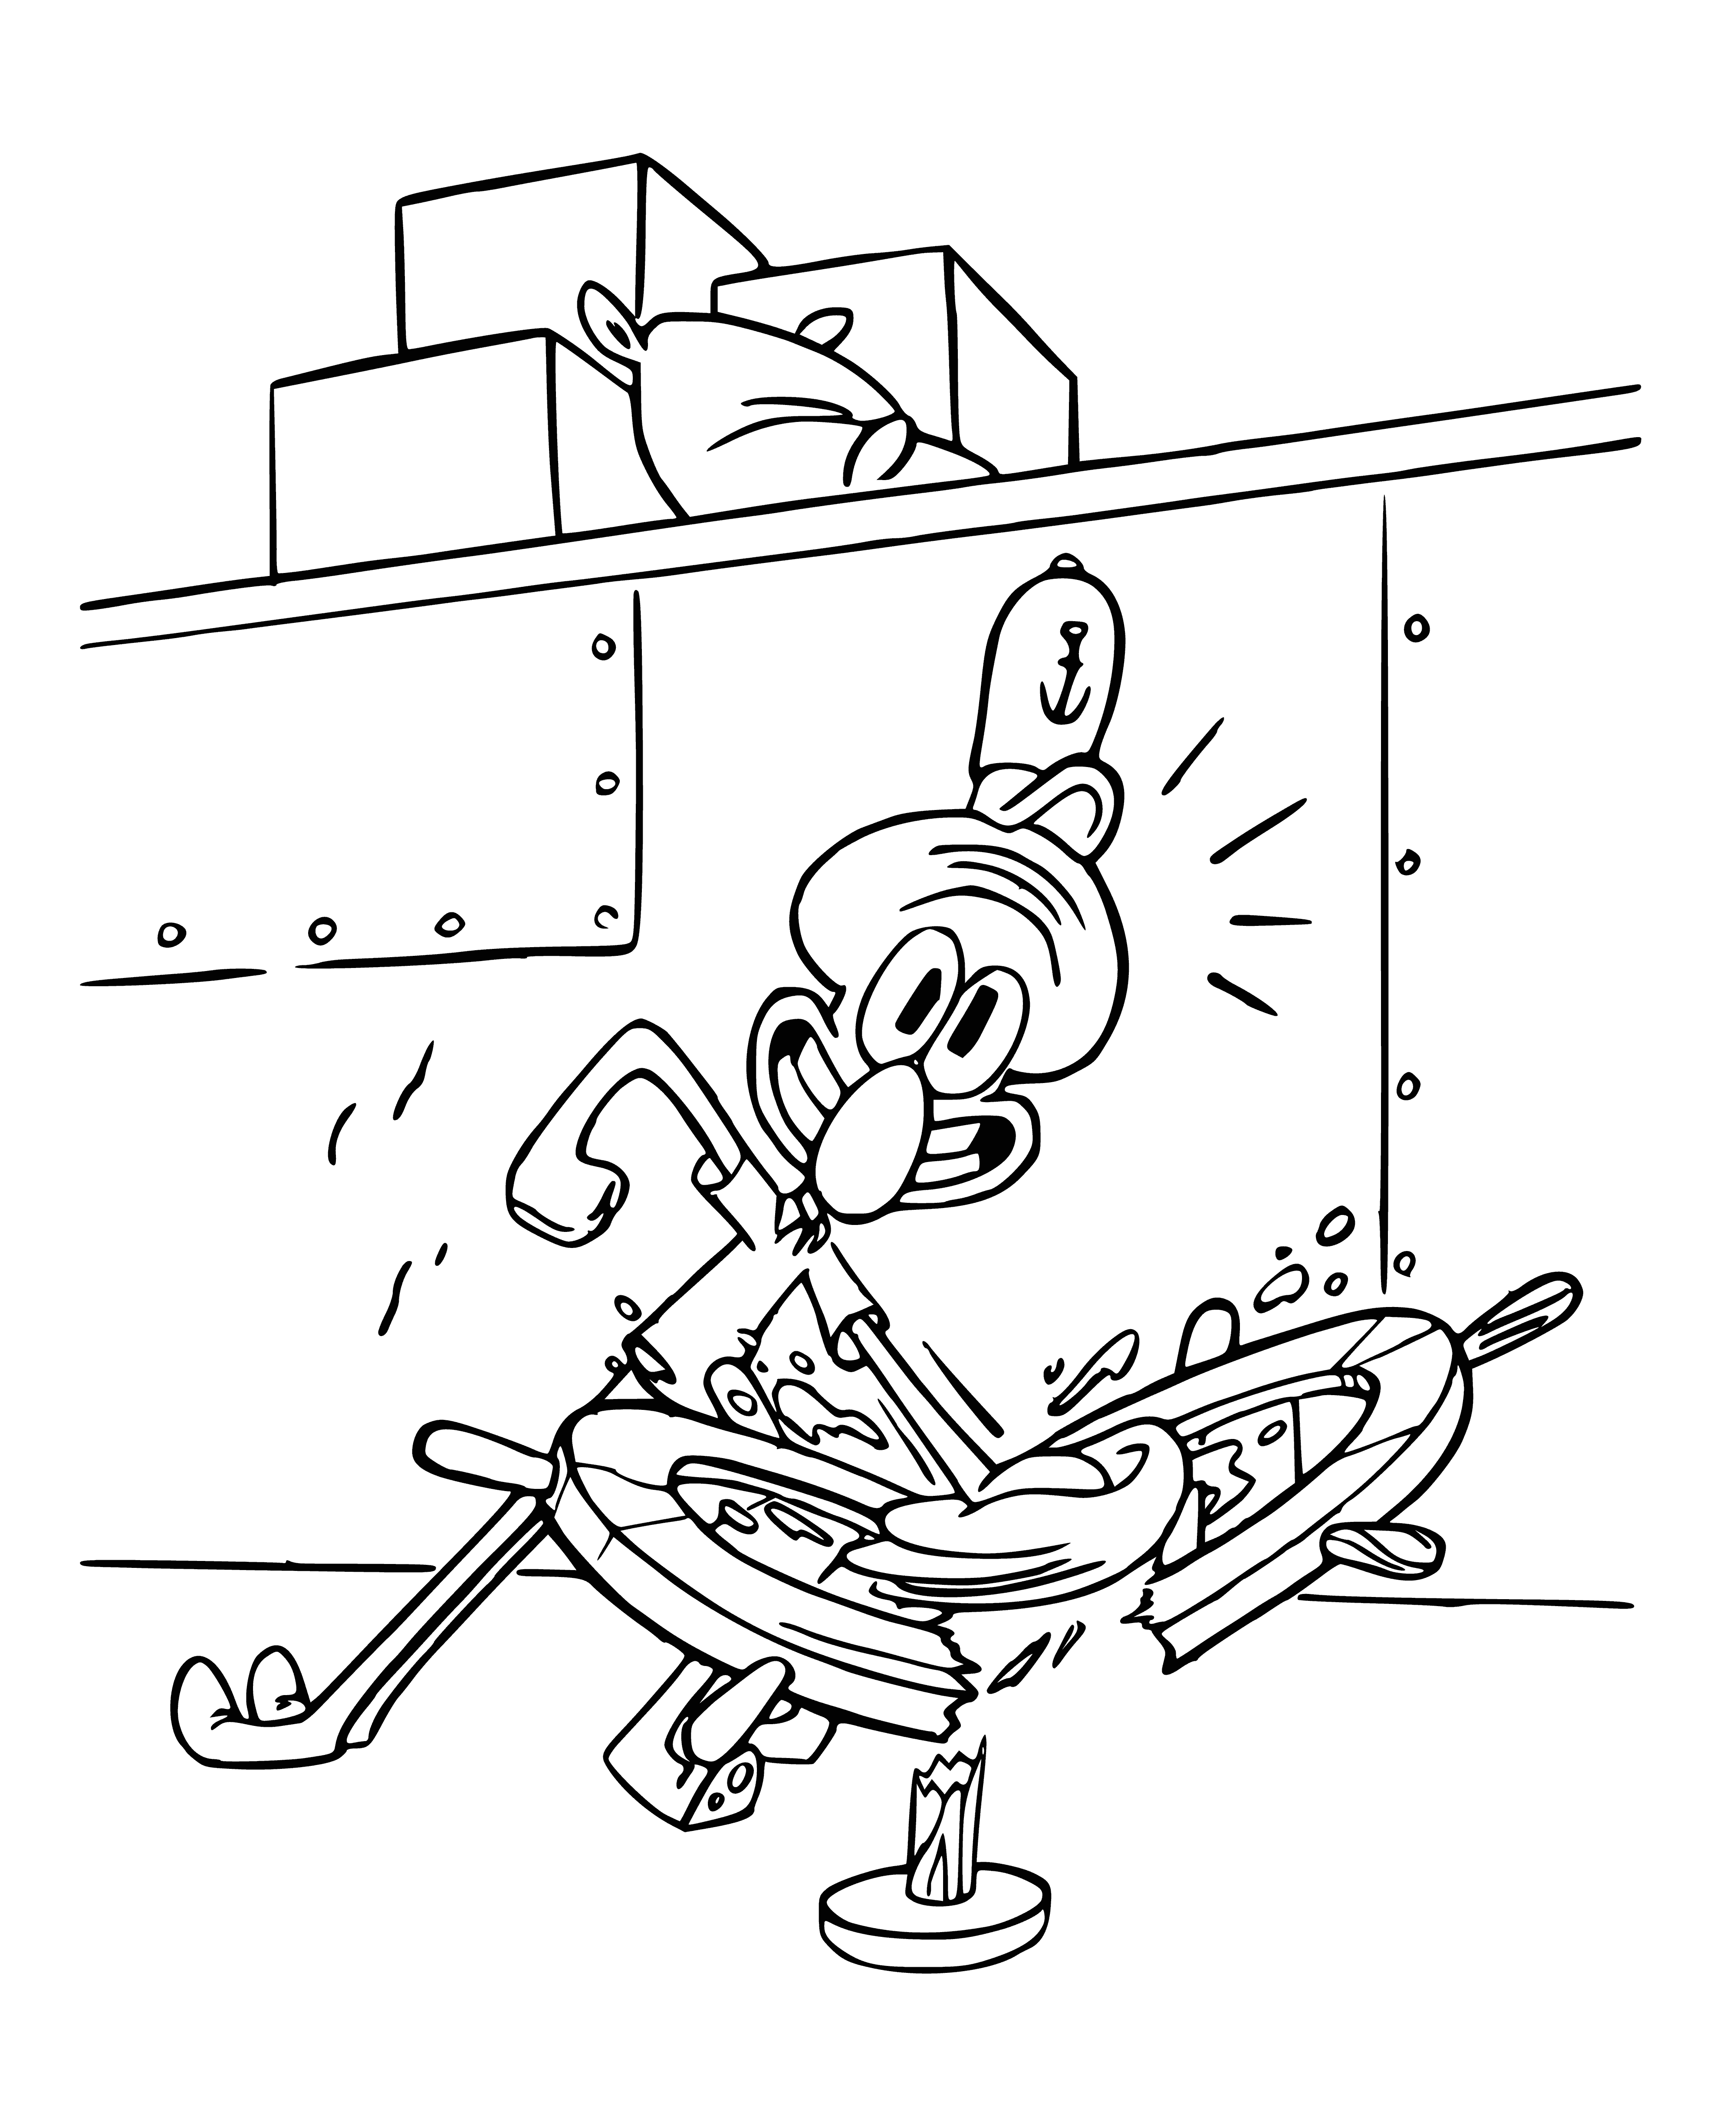 coloring page: SpongeBob sprays a fly on the ceiling with a can of spray, armed with a flyswatter for backup.